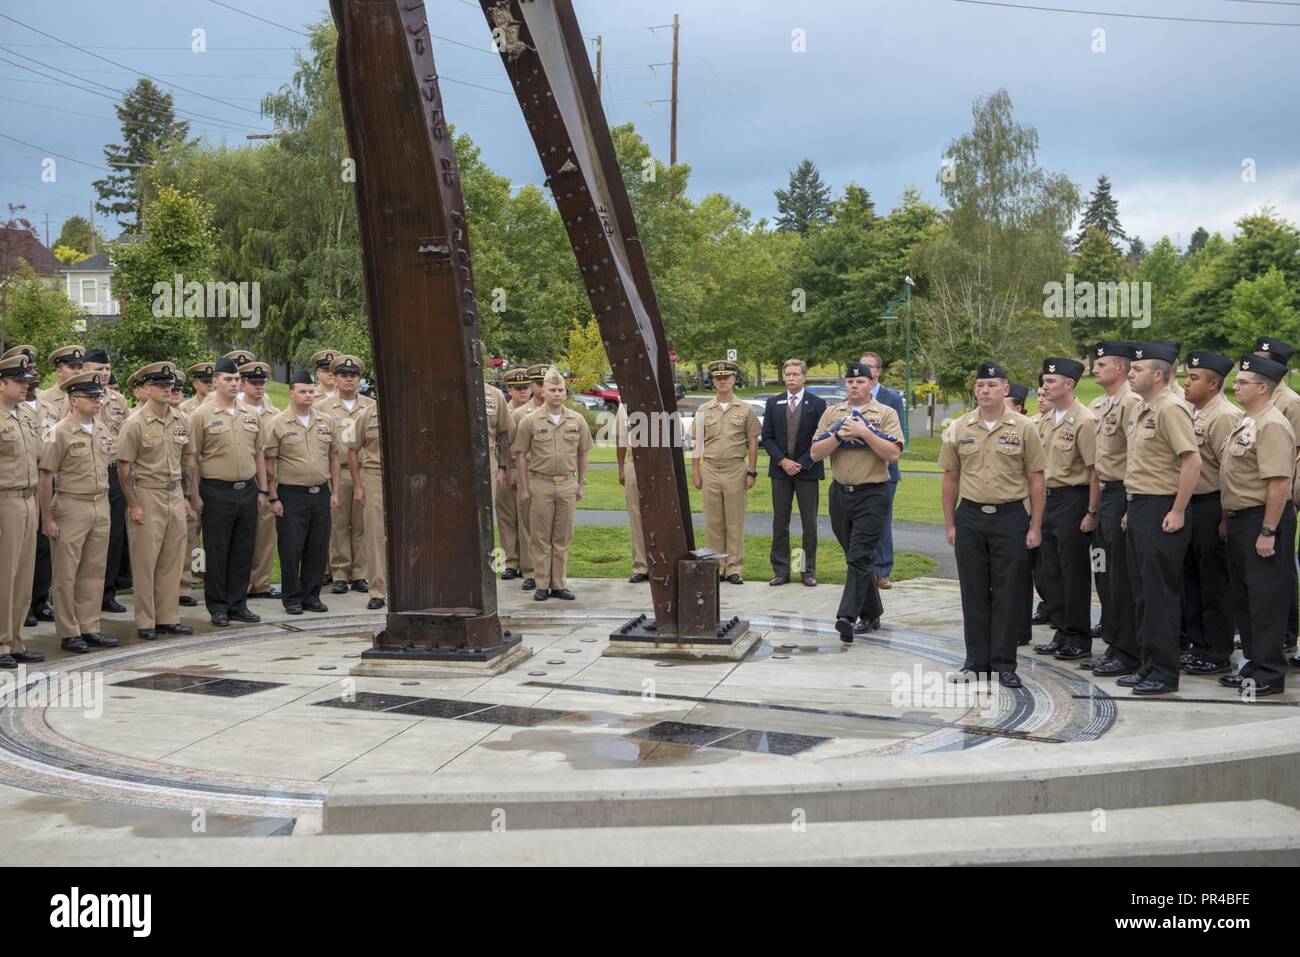 BREMERTON, Wash. (Sept. 11, 2018) Electronics Technician 1st Class James Mooneyham, a chief petty officer select, assigned to Unmanned Undersea Vehicle Squadron 1 (UUVRON 1), conducts morning colors during a 9/11 Remembrance Ceremony held at the Kitsap 9/11 Memorial. The ceremony, held by the 2019 DEVRON 5 Chief Petty Officer Selects, marks the 17th anniversary of the 9/11 attacks and honors those who lost their lives that day. Stock Photo